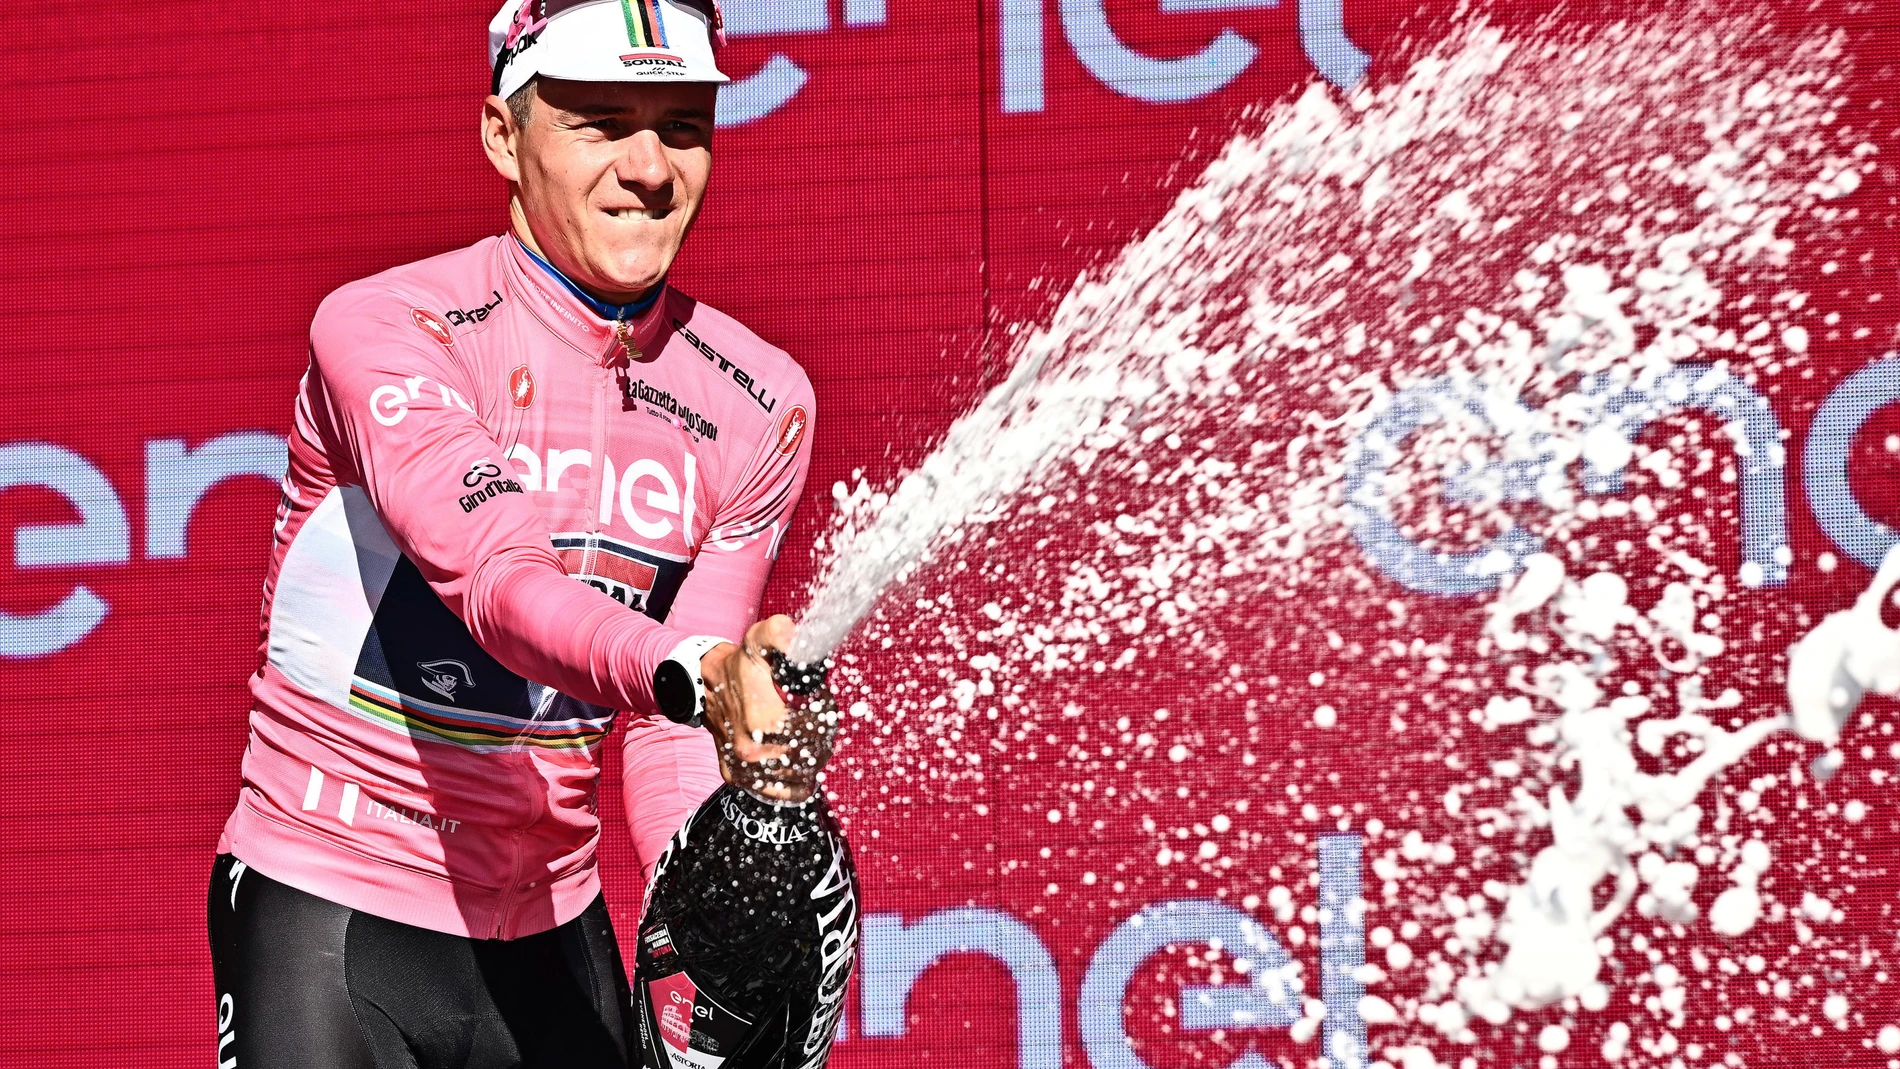 Pescara (Italy), 06/05/2023.- Belgian rider Remco Evenepoel of team Soudal Quick-Step celebrates on the podium wearing the overall leader's pink jersey after winning the first stage of the 2023 Giro d'Italia cycling race, a time trial over 19,6 km from Fossacesia Marina to Ortona, Italy, 06 May 2023. (Ciclismo, Italia) EFE/EPA/LUCA ZENNARO 